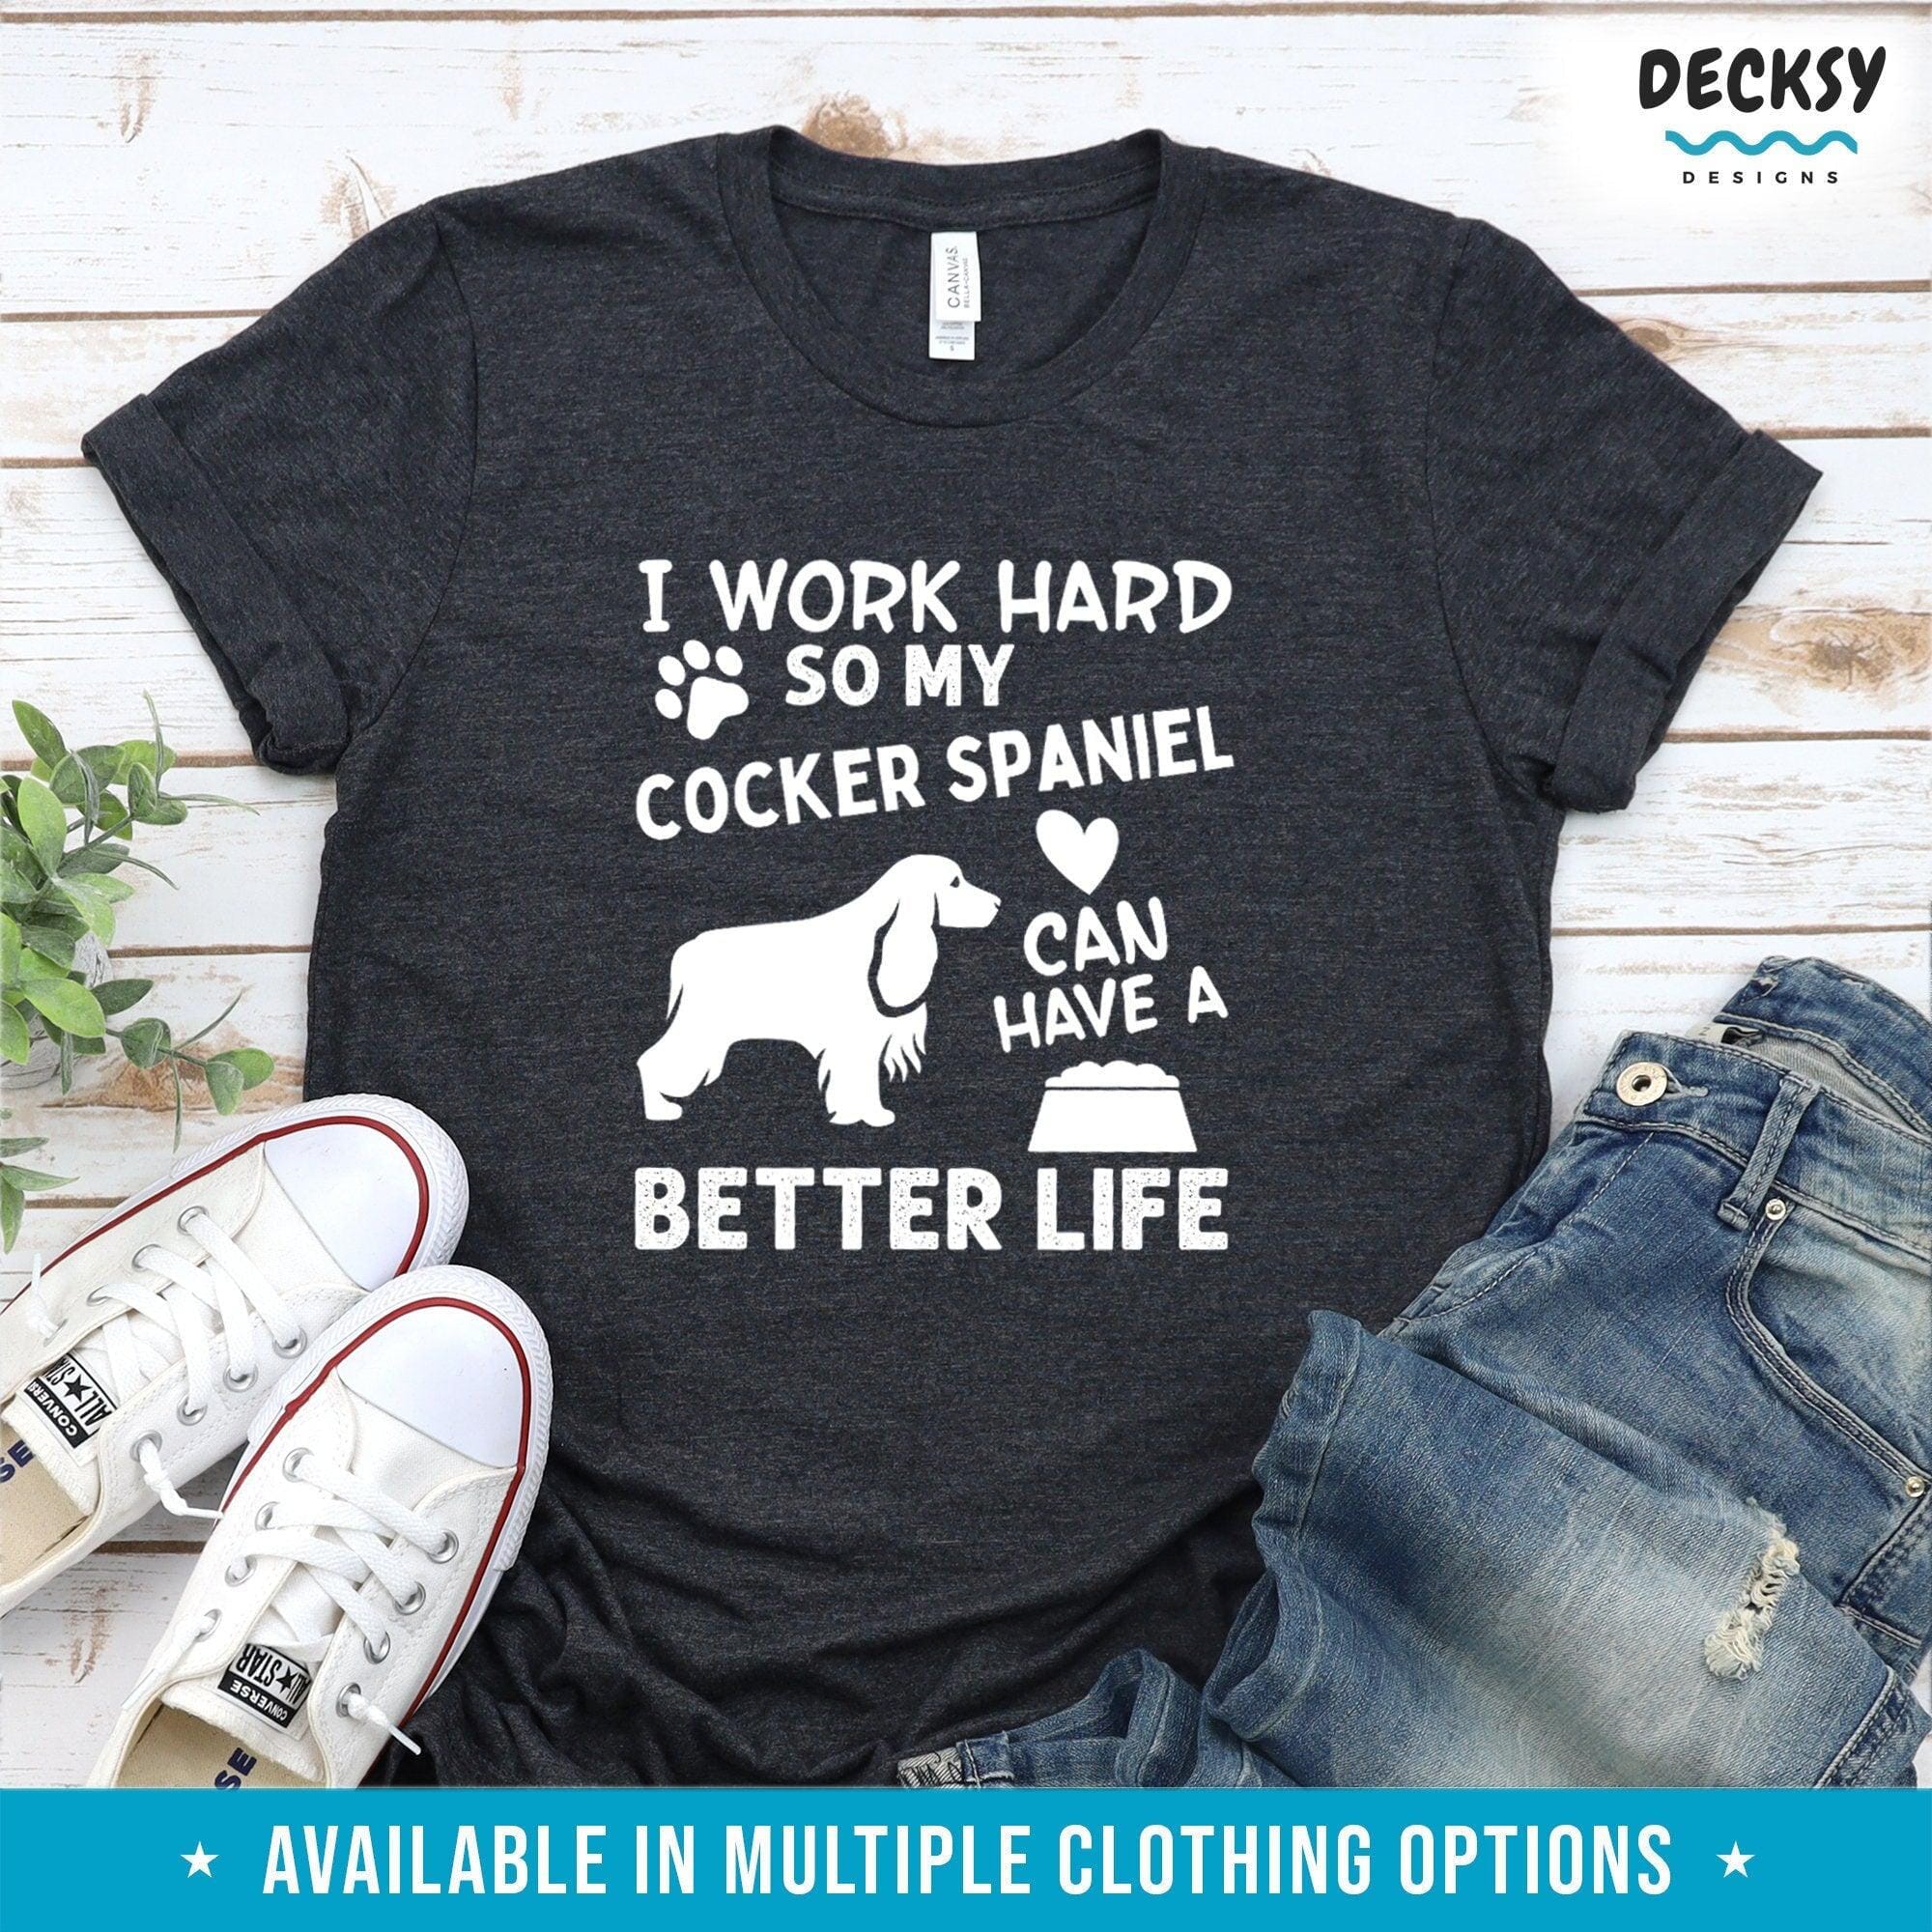 Cocker Spaniel Shirt, Funny Dog Lover Gift-Clothing:Gender-Neutral Adult Clothing:Tops & Tees:T-shirts:Graphic Tees-DecksyDesigns